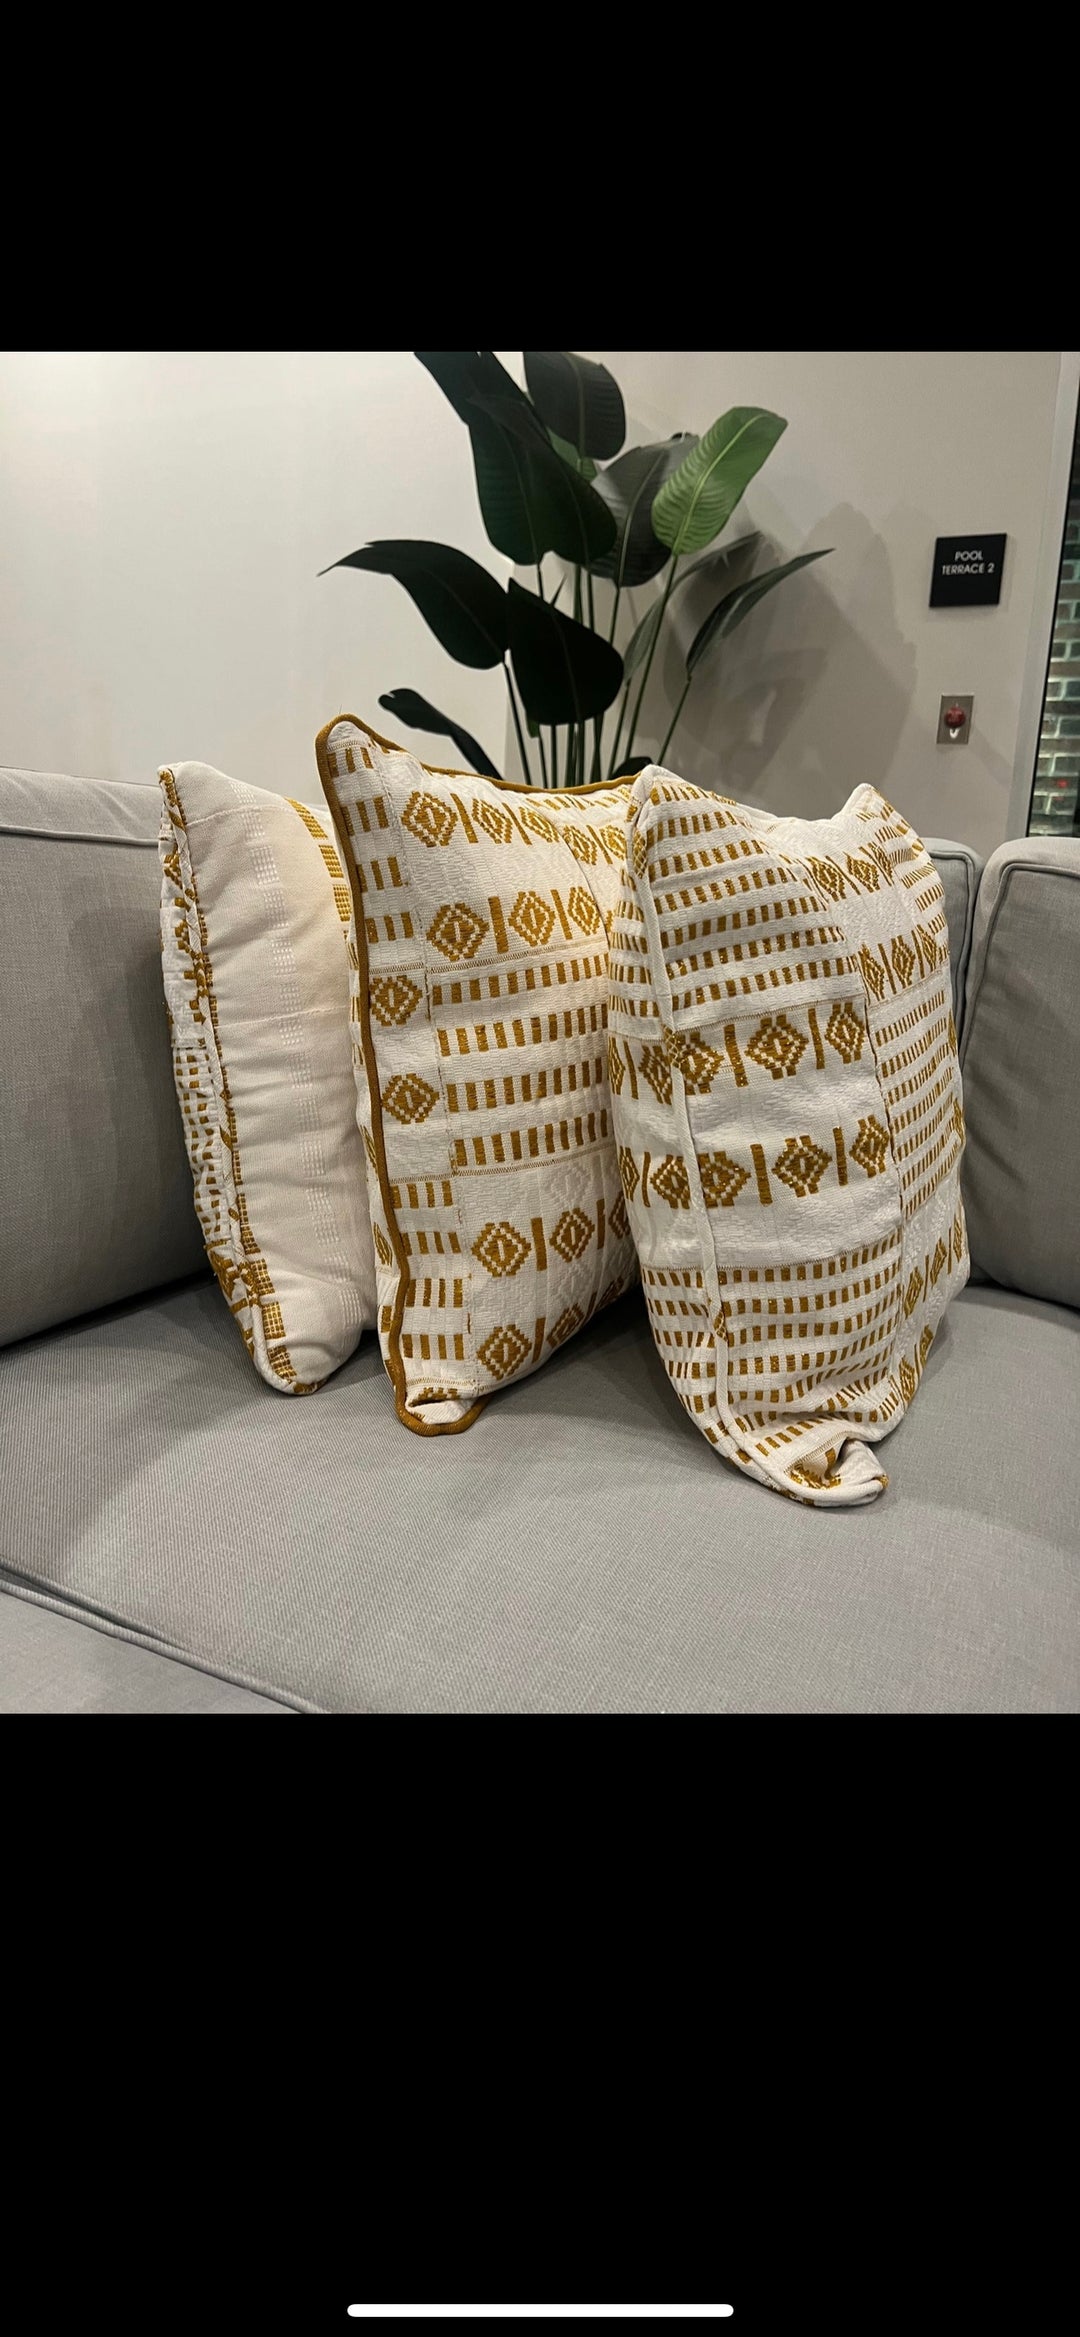 Obrempong Home's handwoven Kente throw pillow, showcasing traditional Kente cloth patterns, an essential element in Kente-style interior design and vibrant Kente patterns for home decor